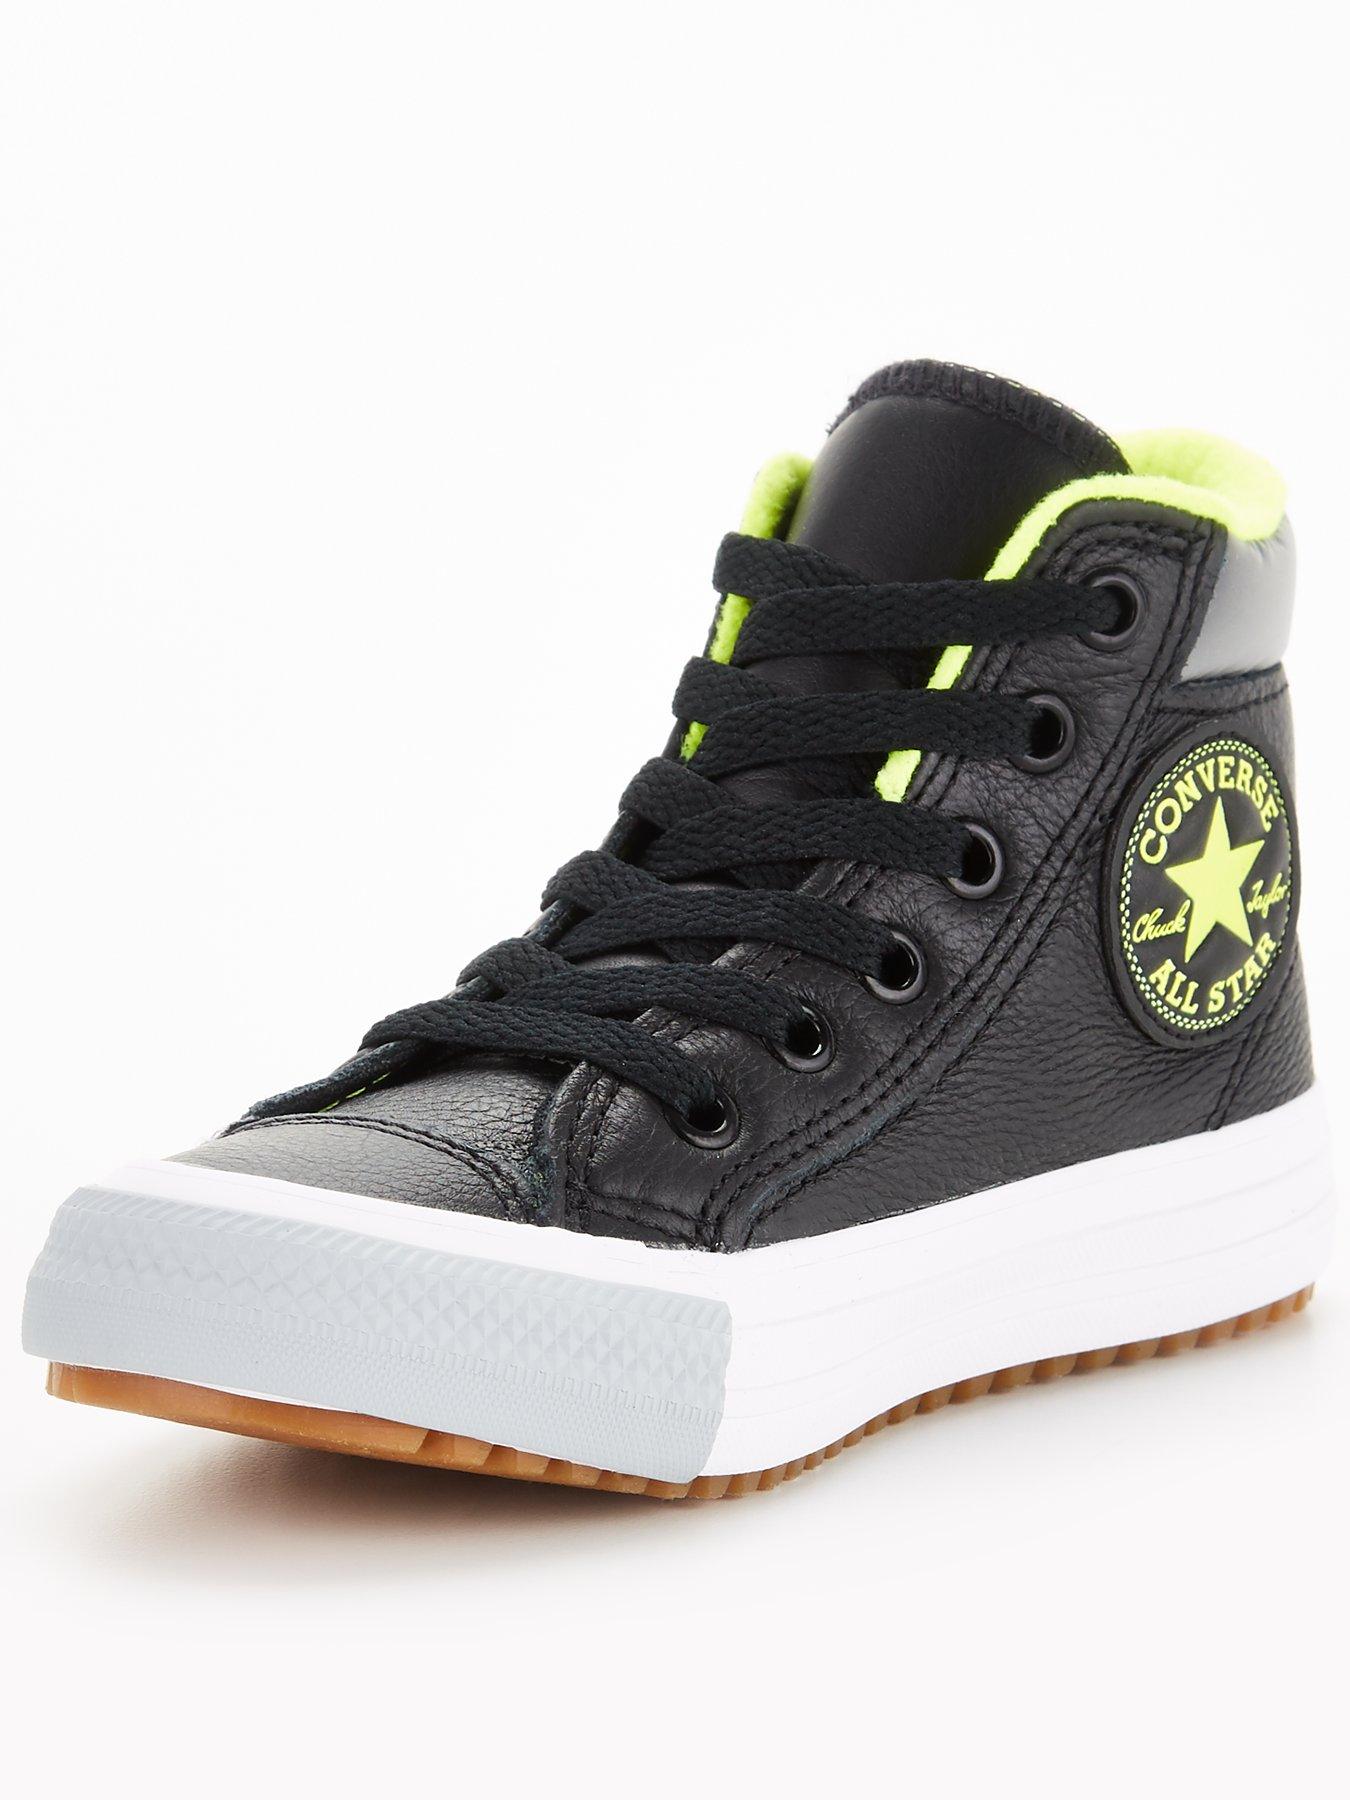 Converse Chuck Taylor All Star Leather Childrens Trainers - Black | very.co. uk